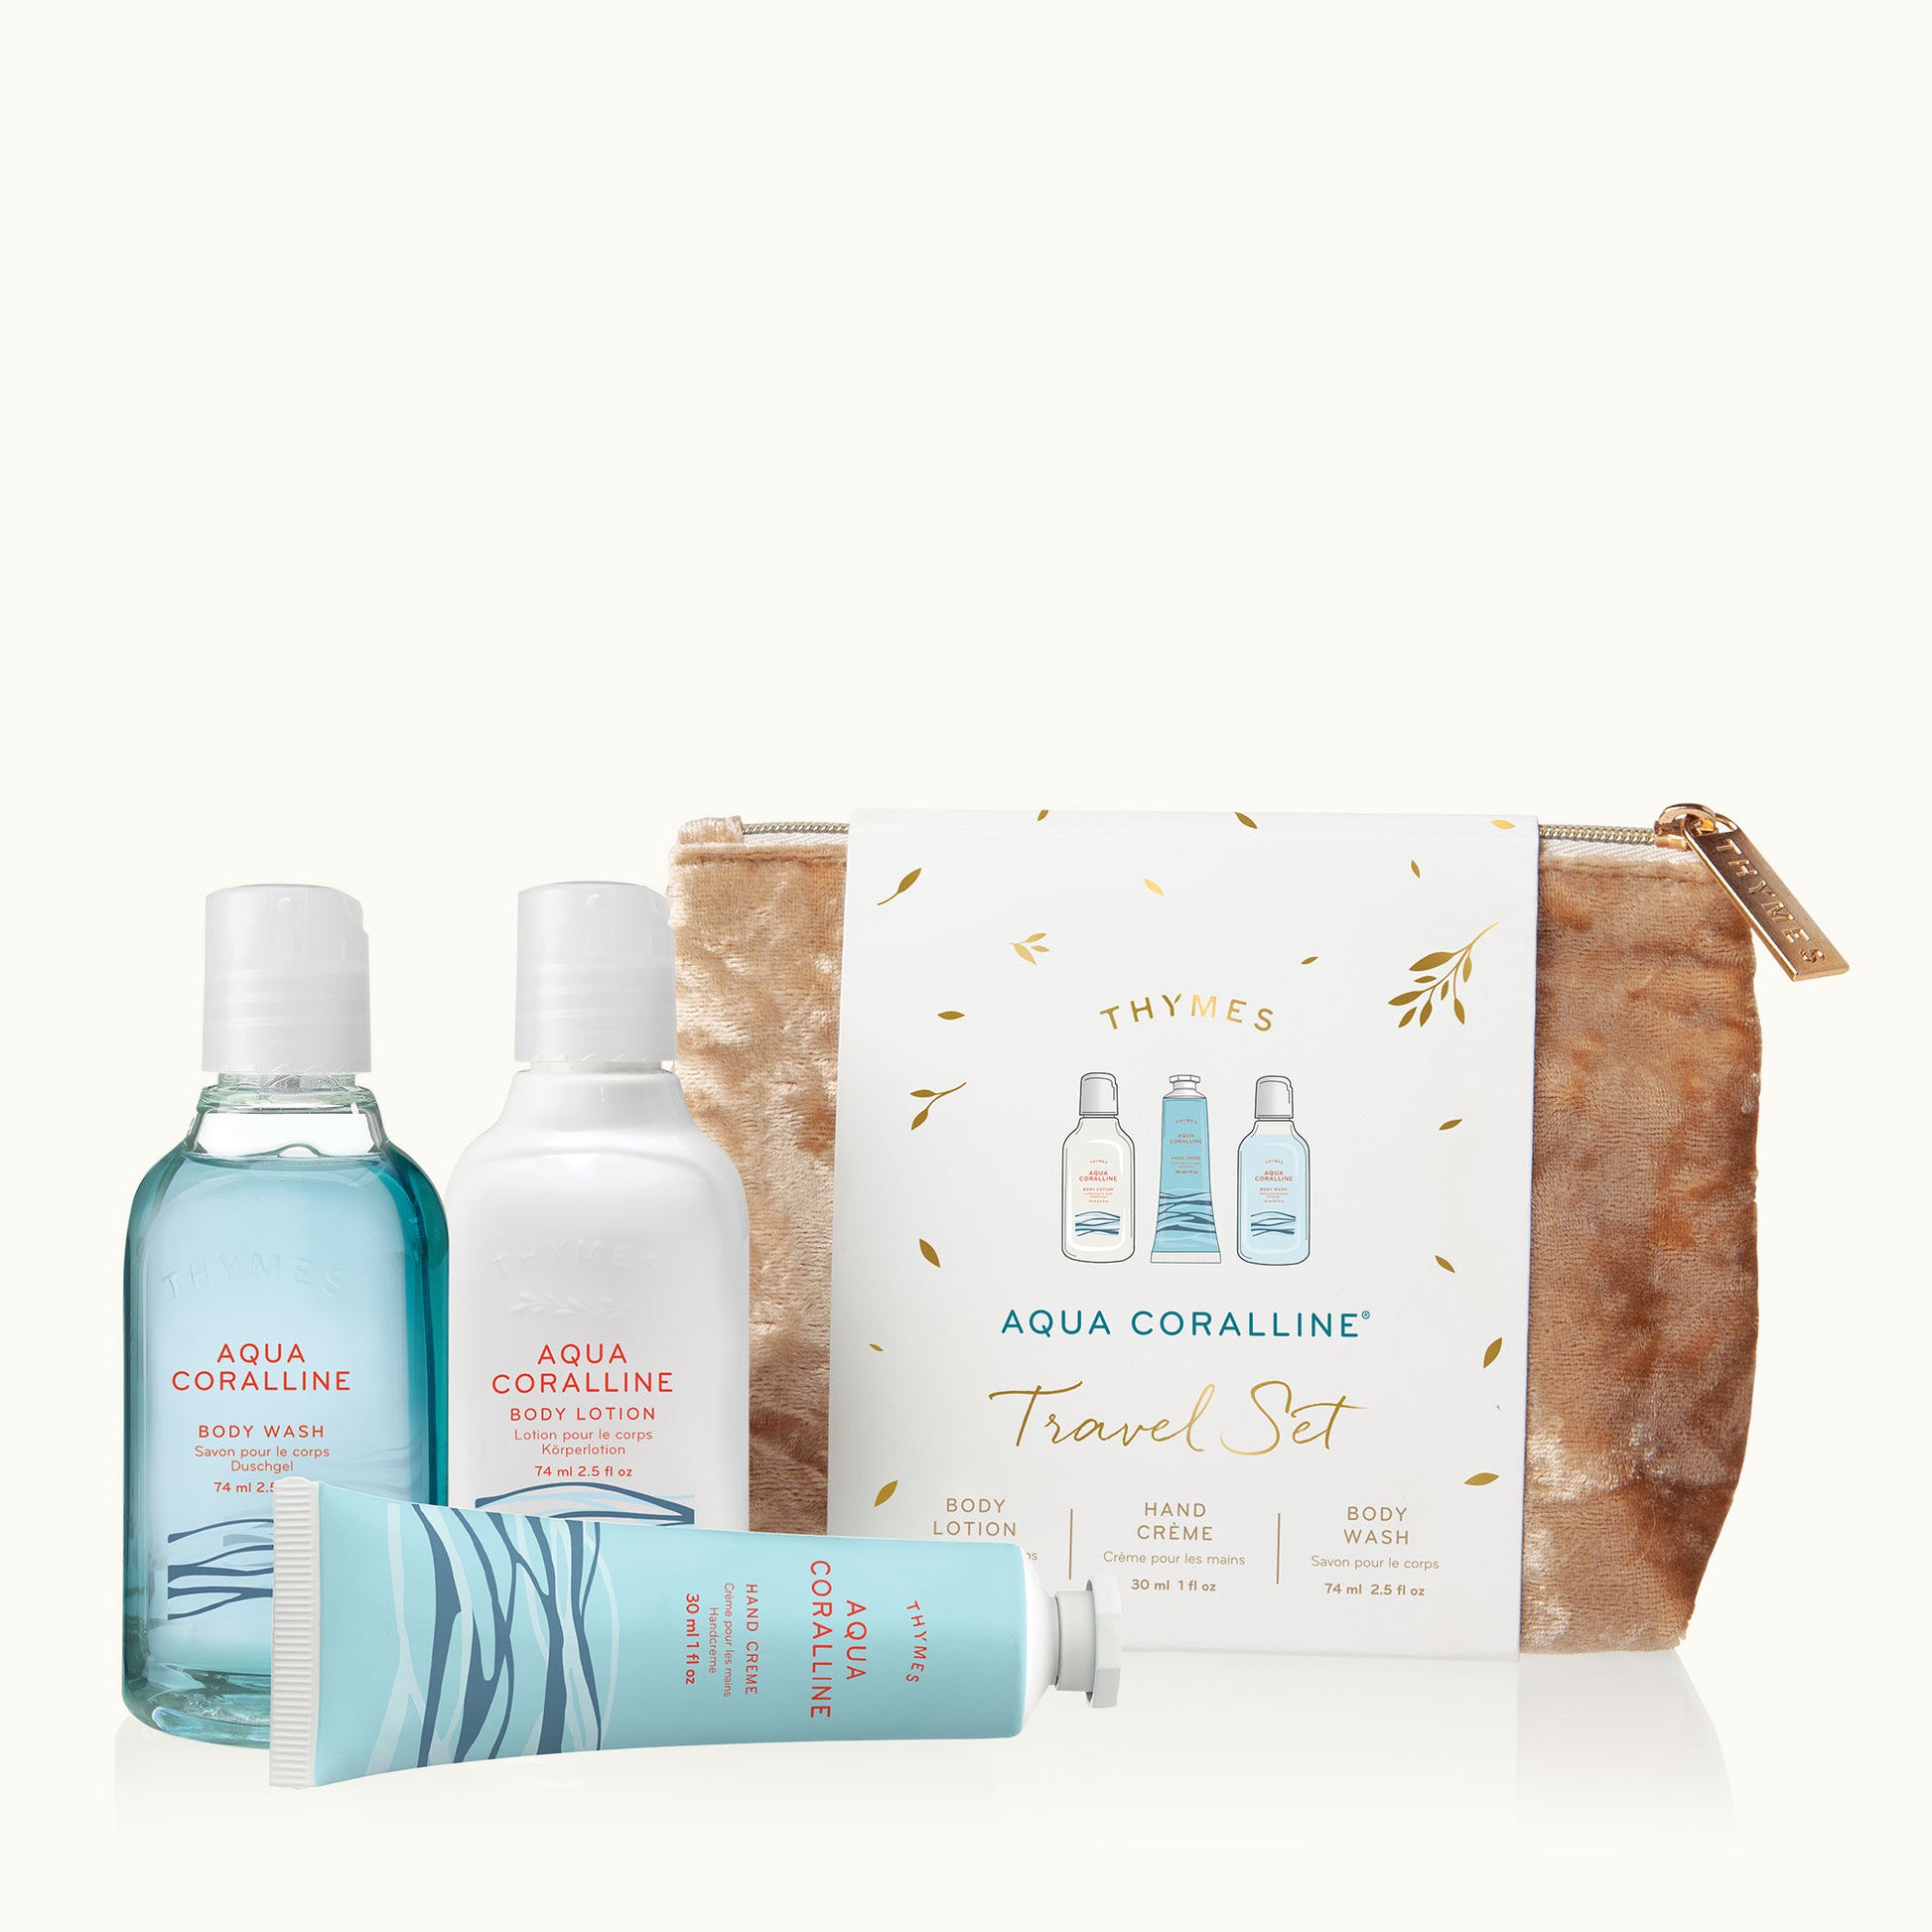 Aqua Coraline Travel Set with Beauty Bag Gifts Thymes   